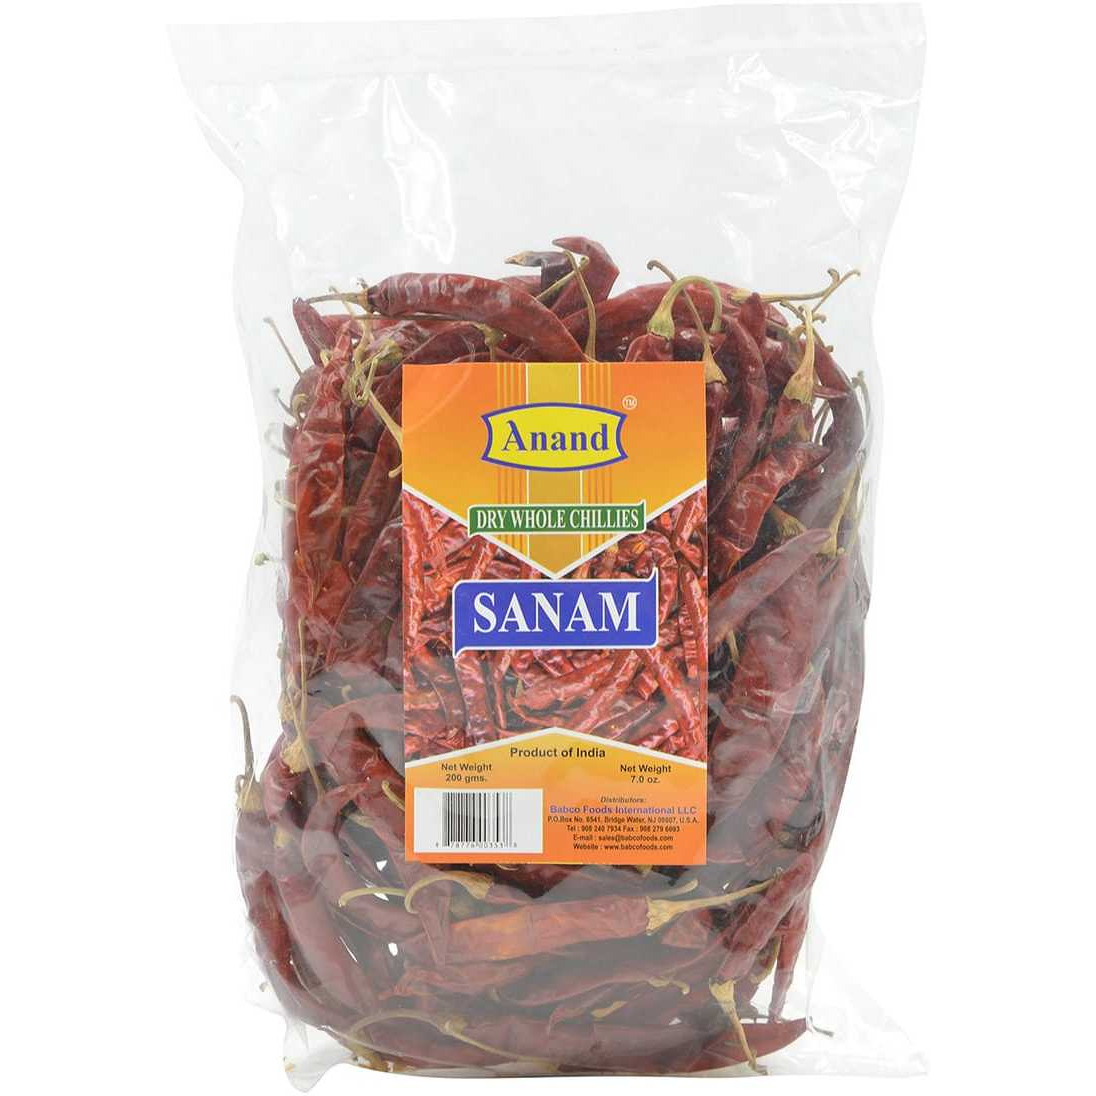 Anand Dry Whole Chillies Sanam - 400 Gm (14.08 Oz)